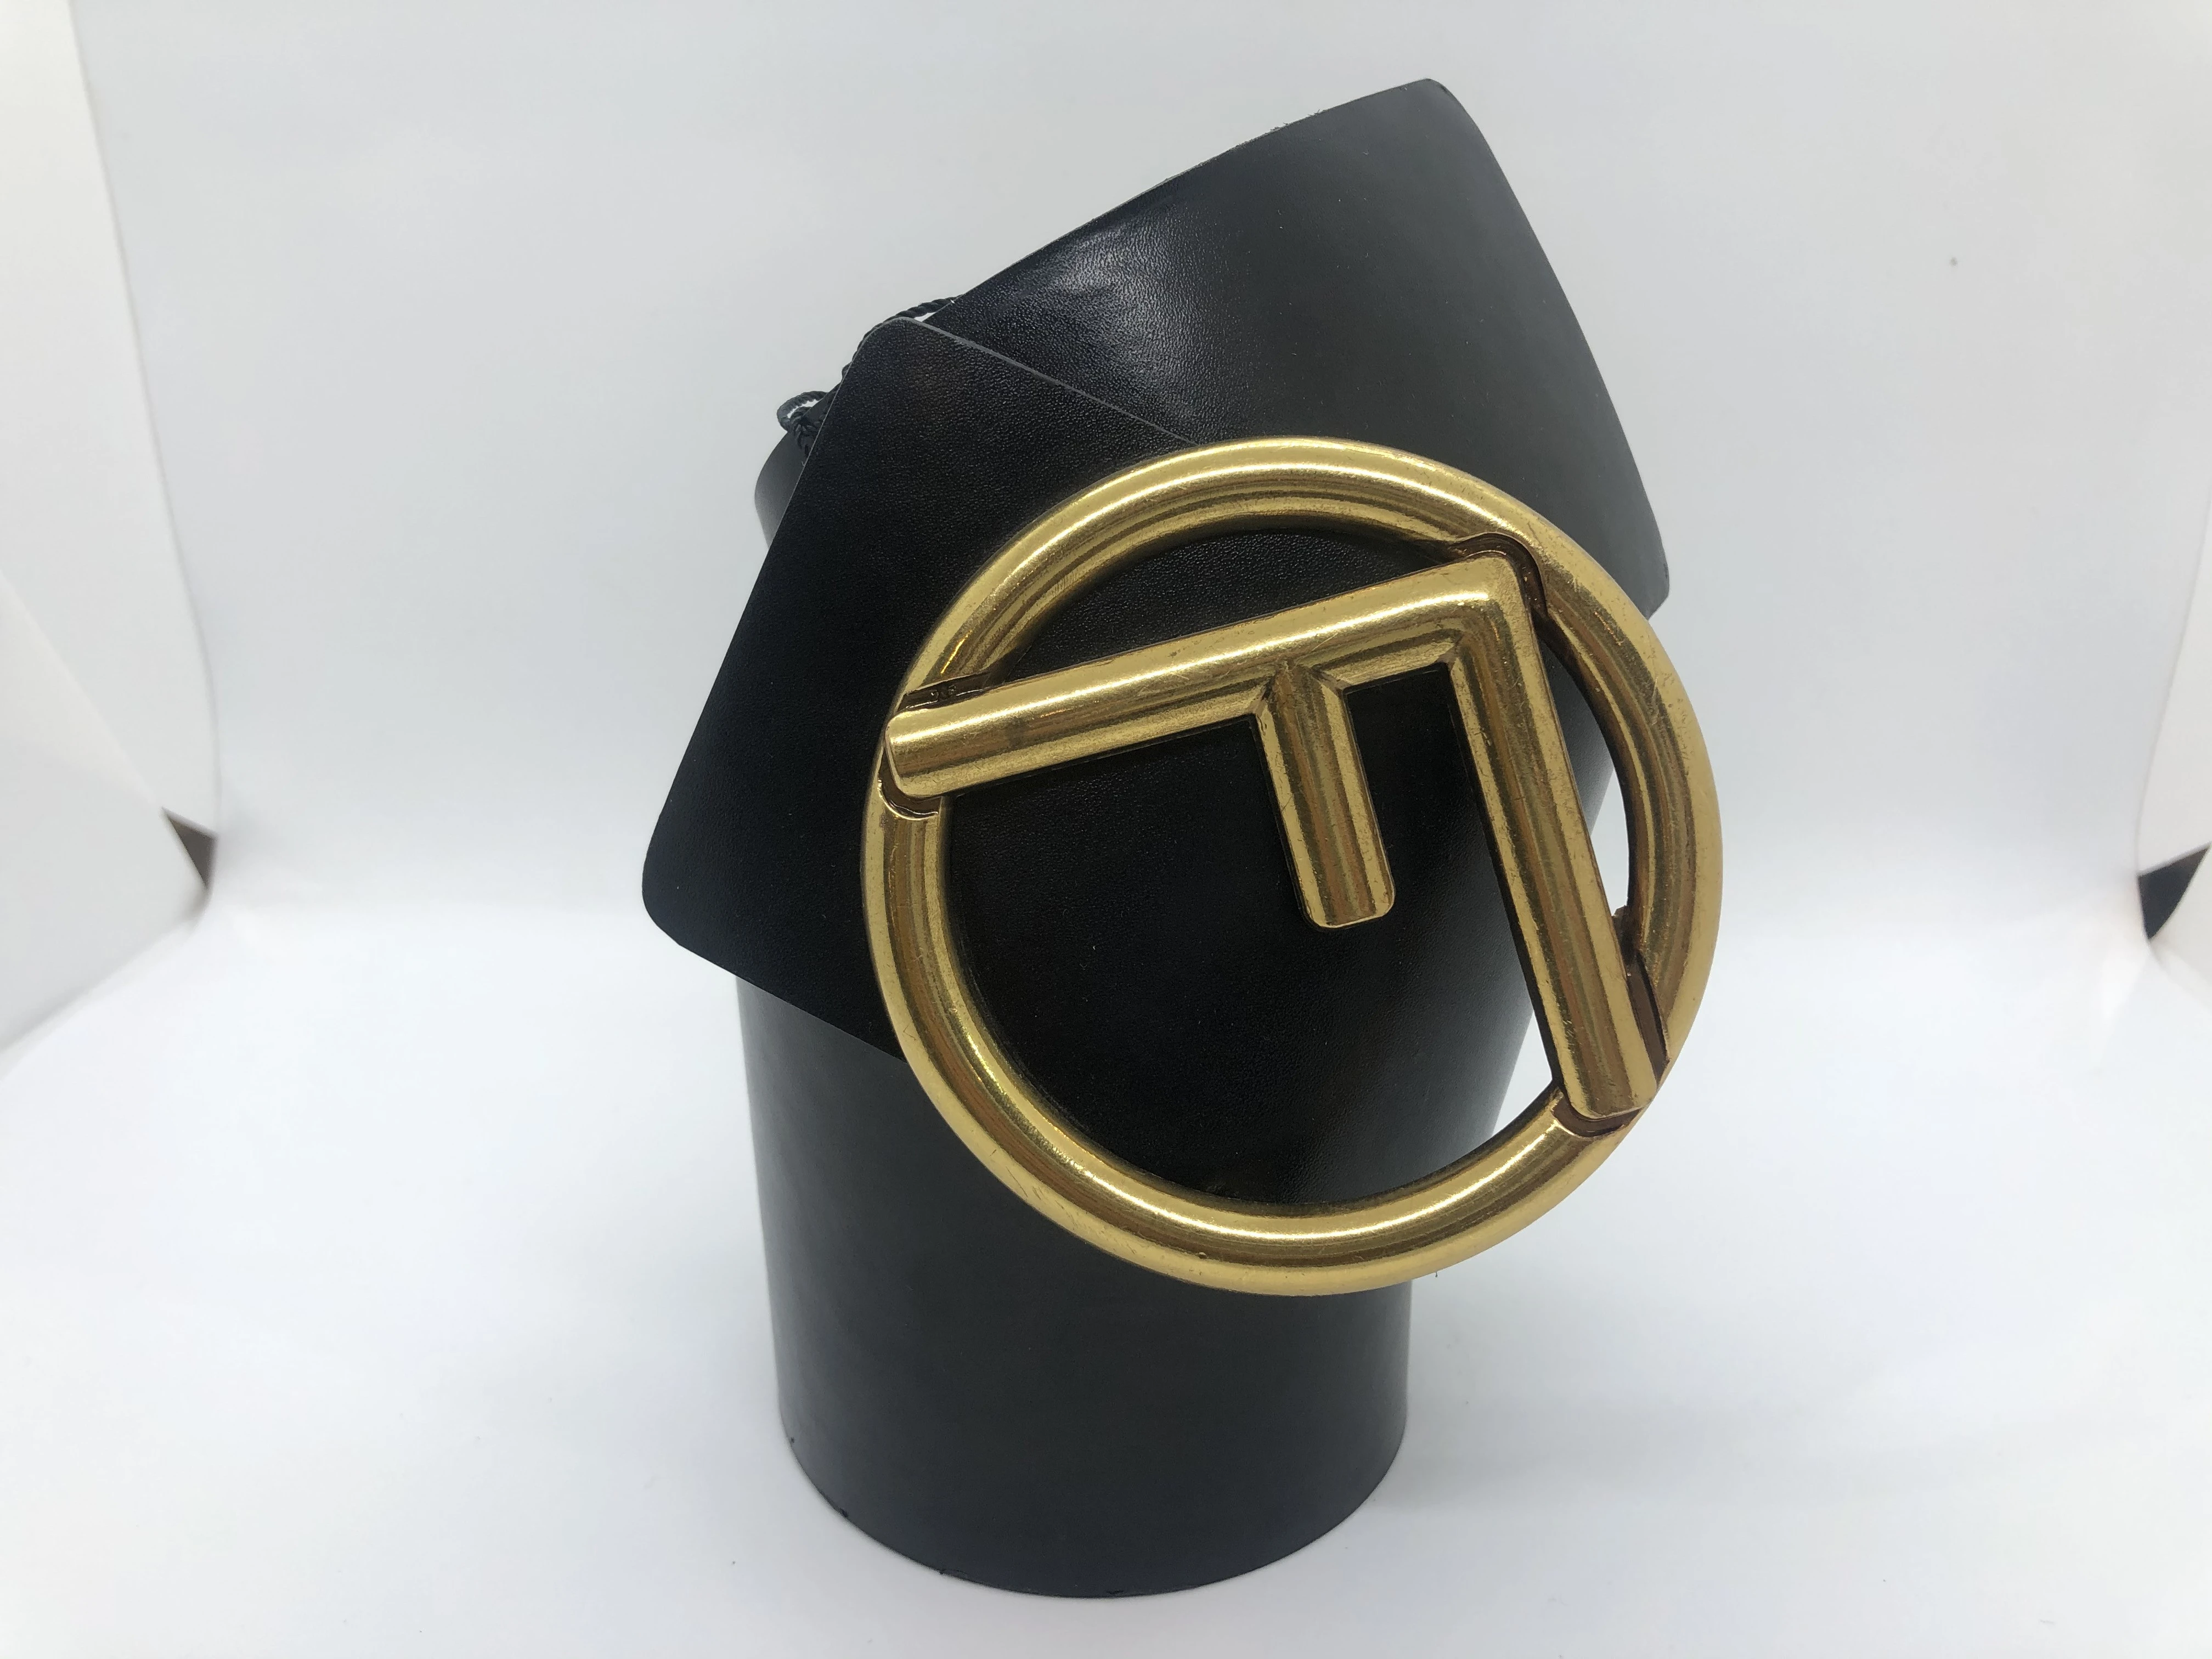 A black belt for women from Fendi .. A golden buckle with finishing touches with the brand's logo